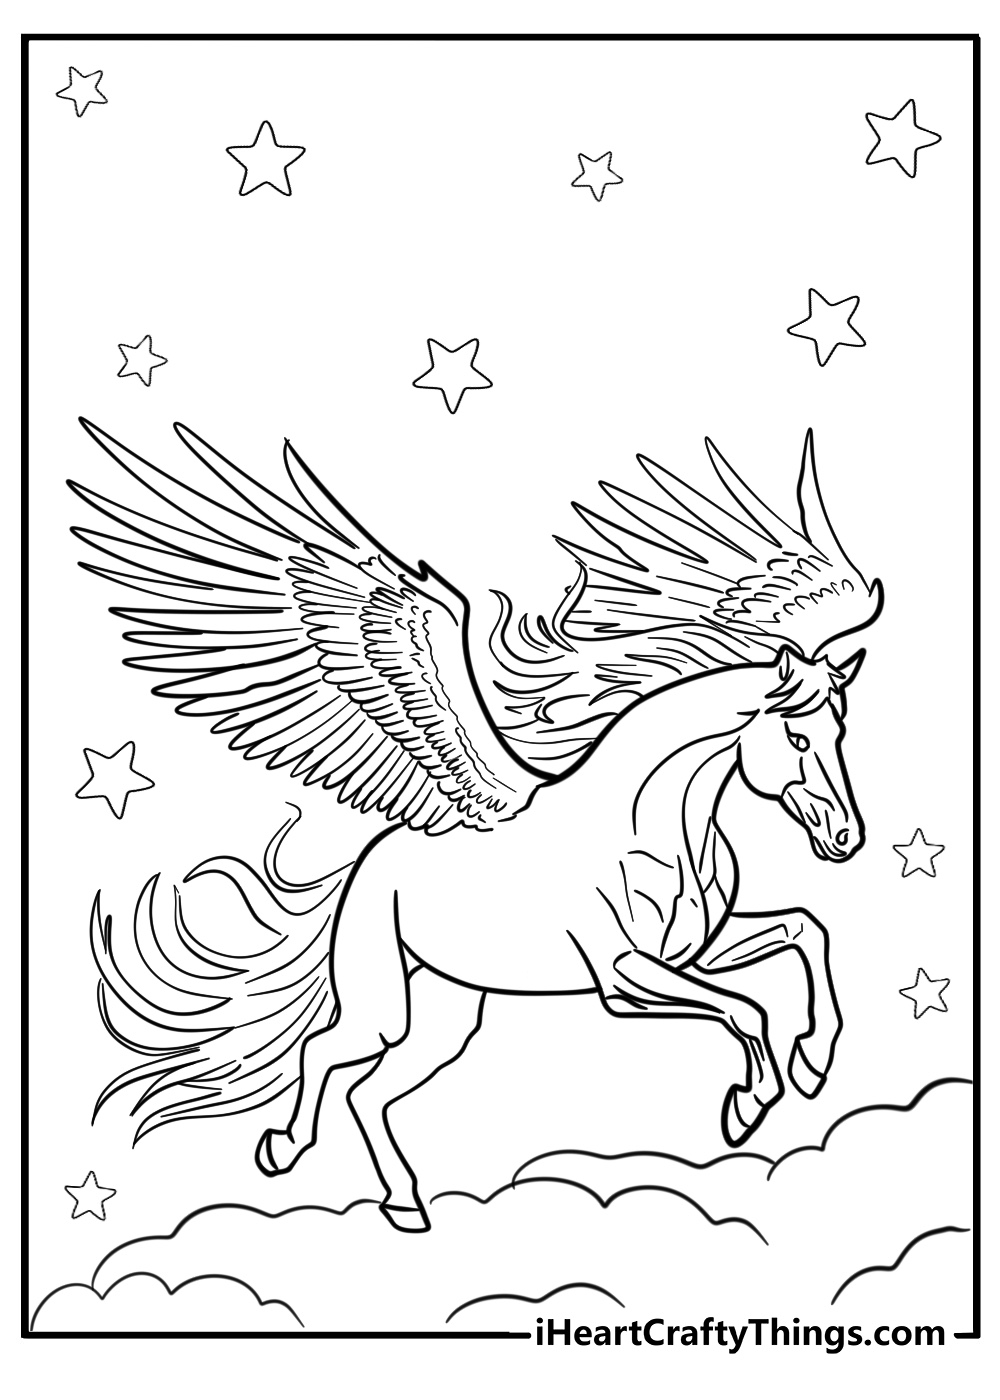 Realistic pegasus coloring page with starry night sky